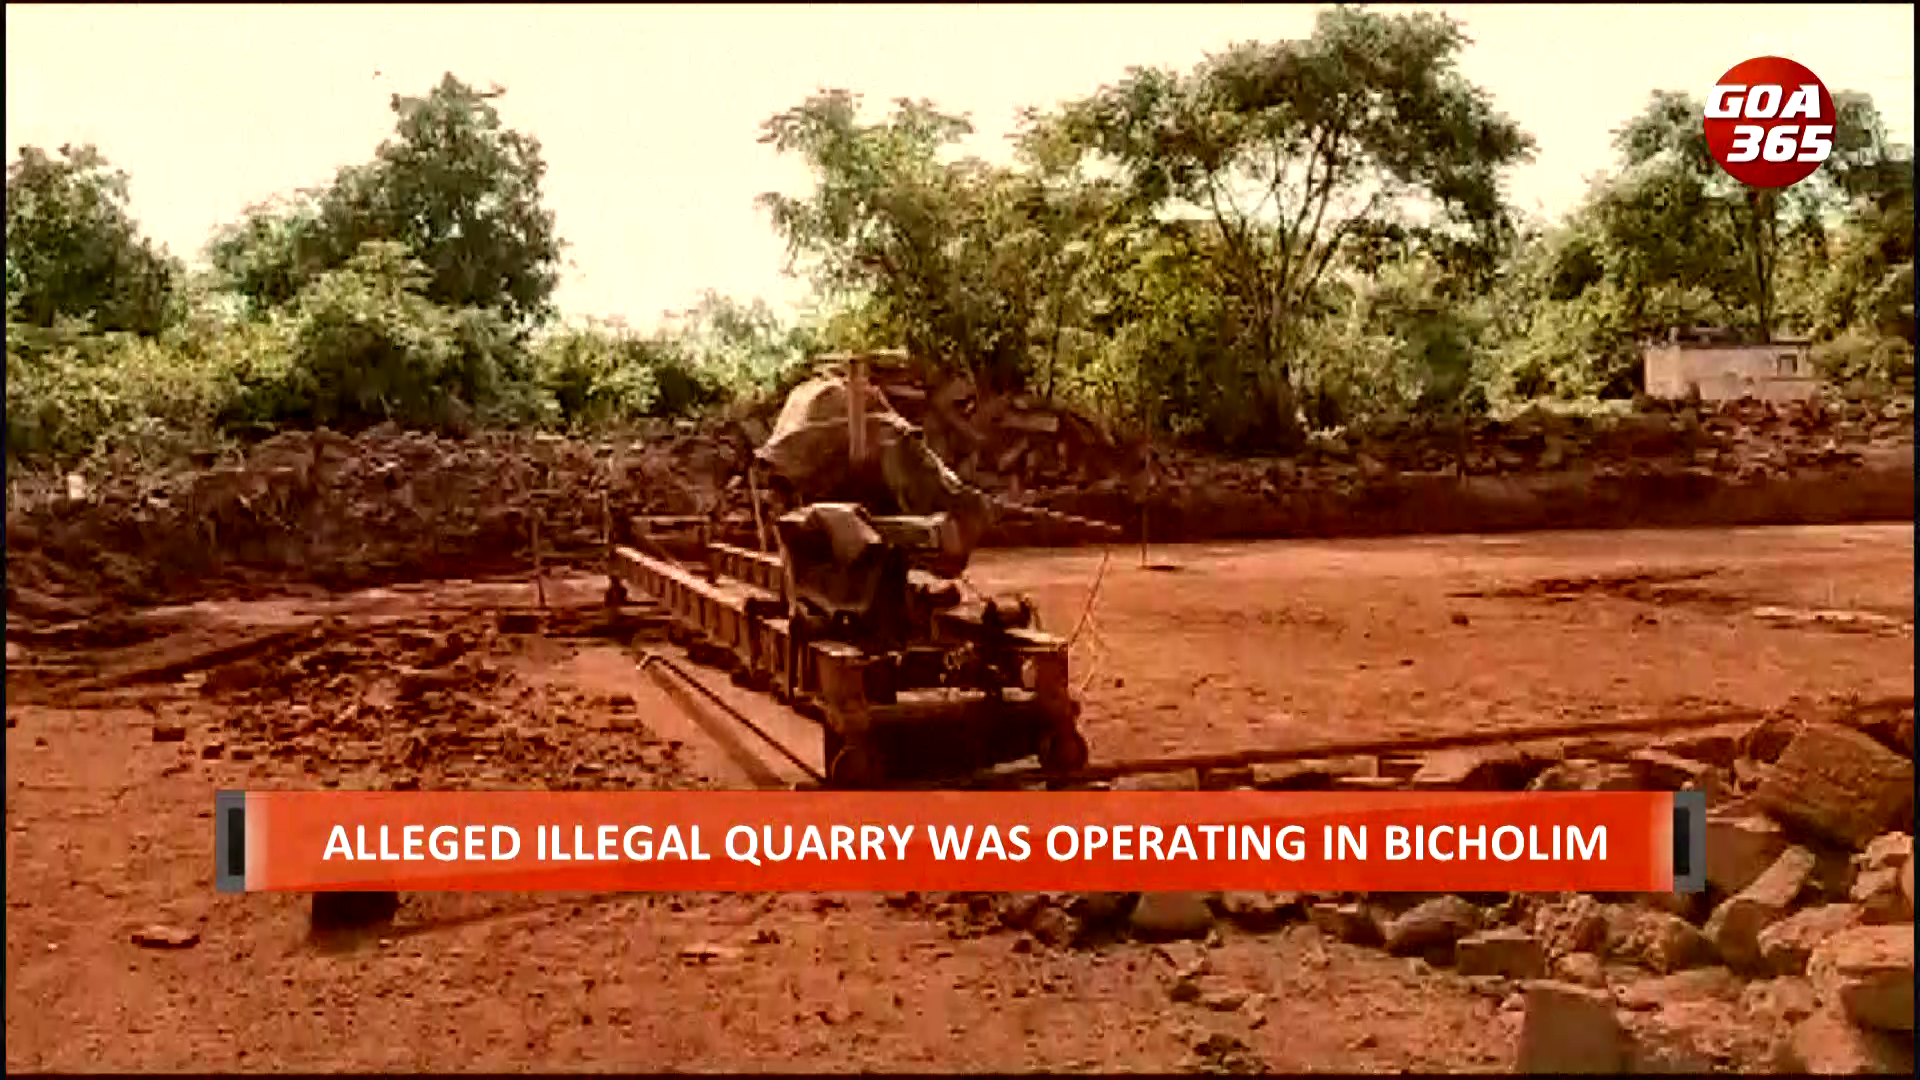 Police Crack-Down on Allegedly Illegal Quarry in Bicholim || ENGLISH || GOA365 